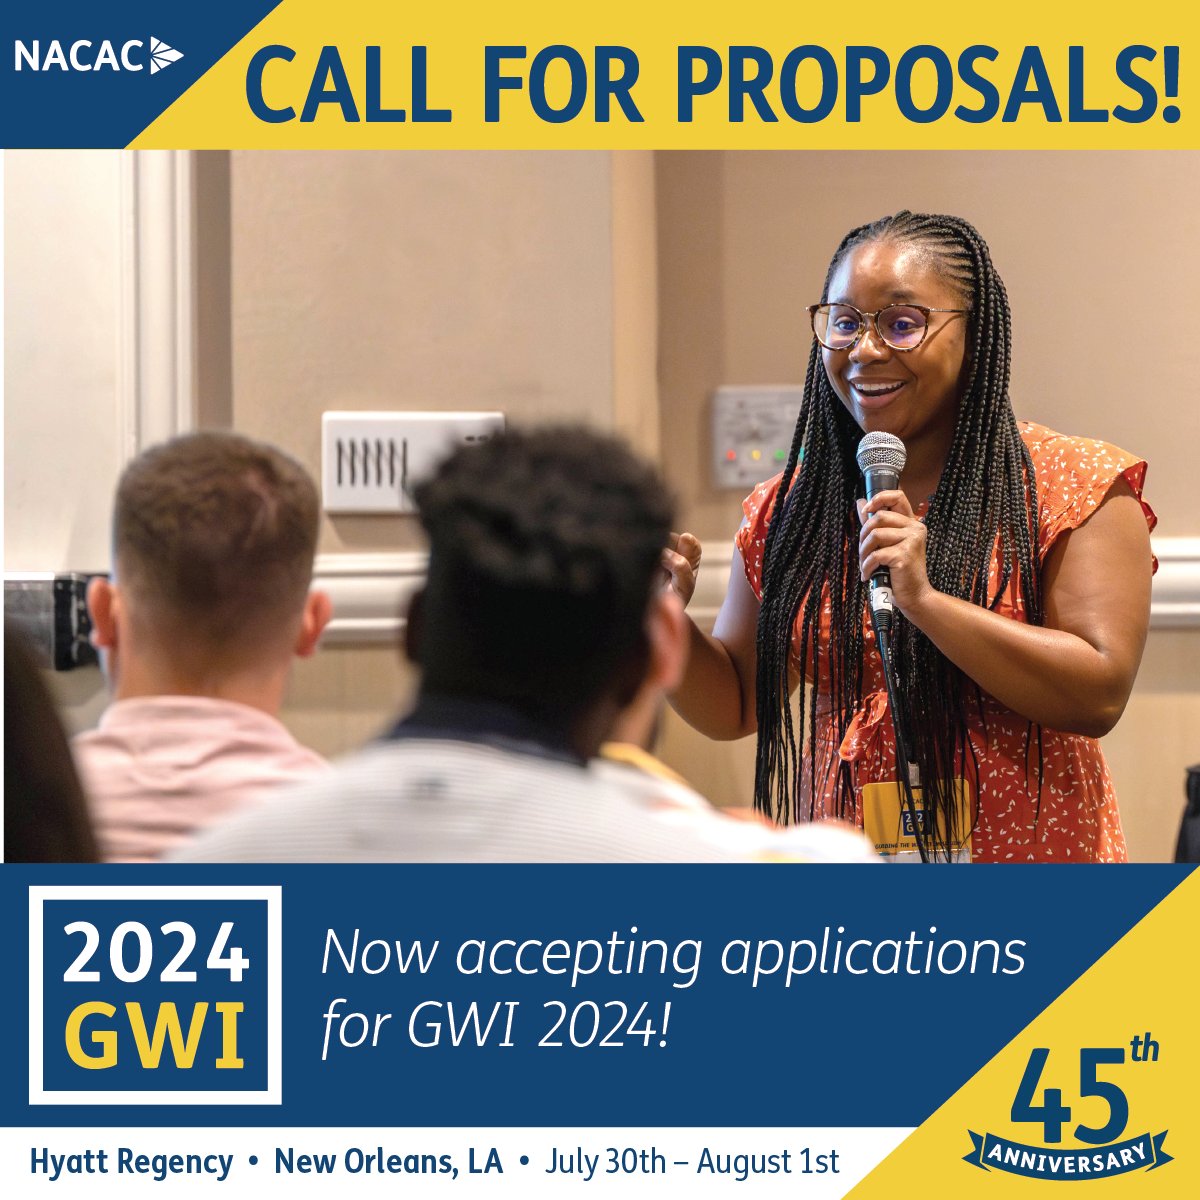 Call for Proposals is underway! Interested in presenting at #GWI2024? Proposals are due Feb 12. Your participation champions the needs of diverse students during the #collegeadmission process! ow.ly/hQbO50Qu81g #equity #diversity #inclusion #NACAC